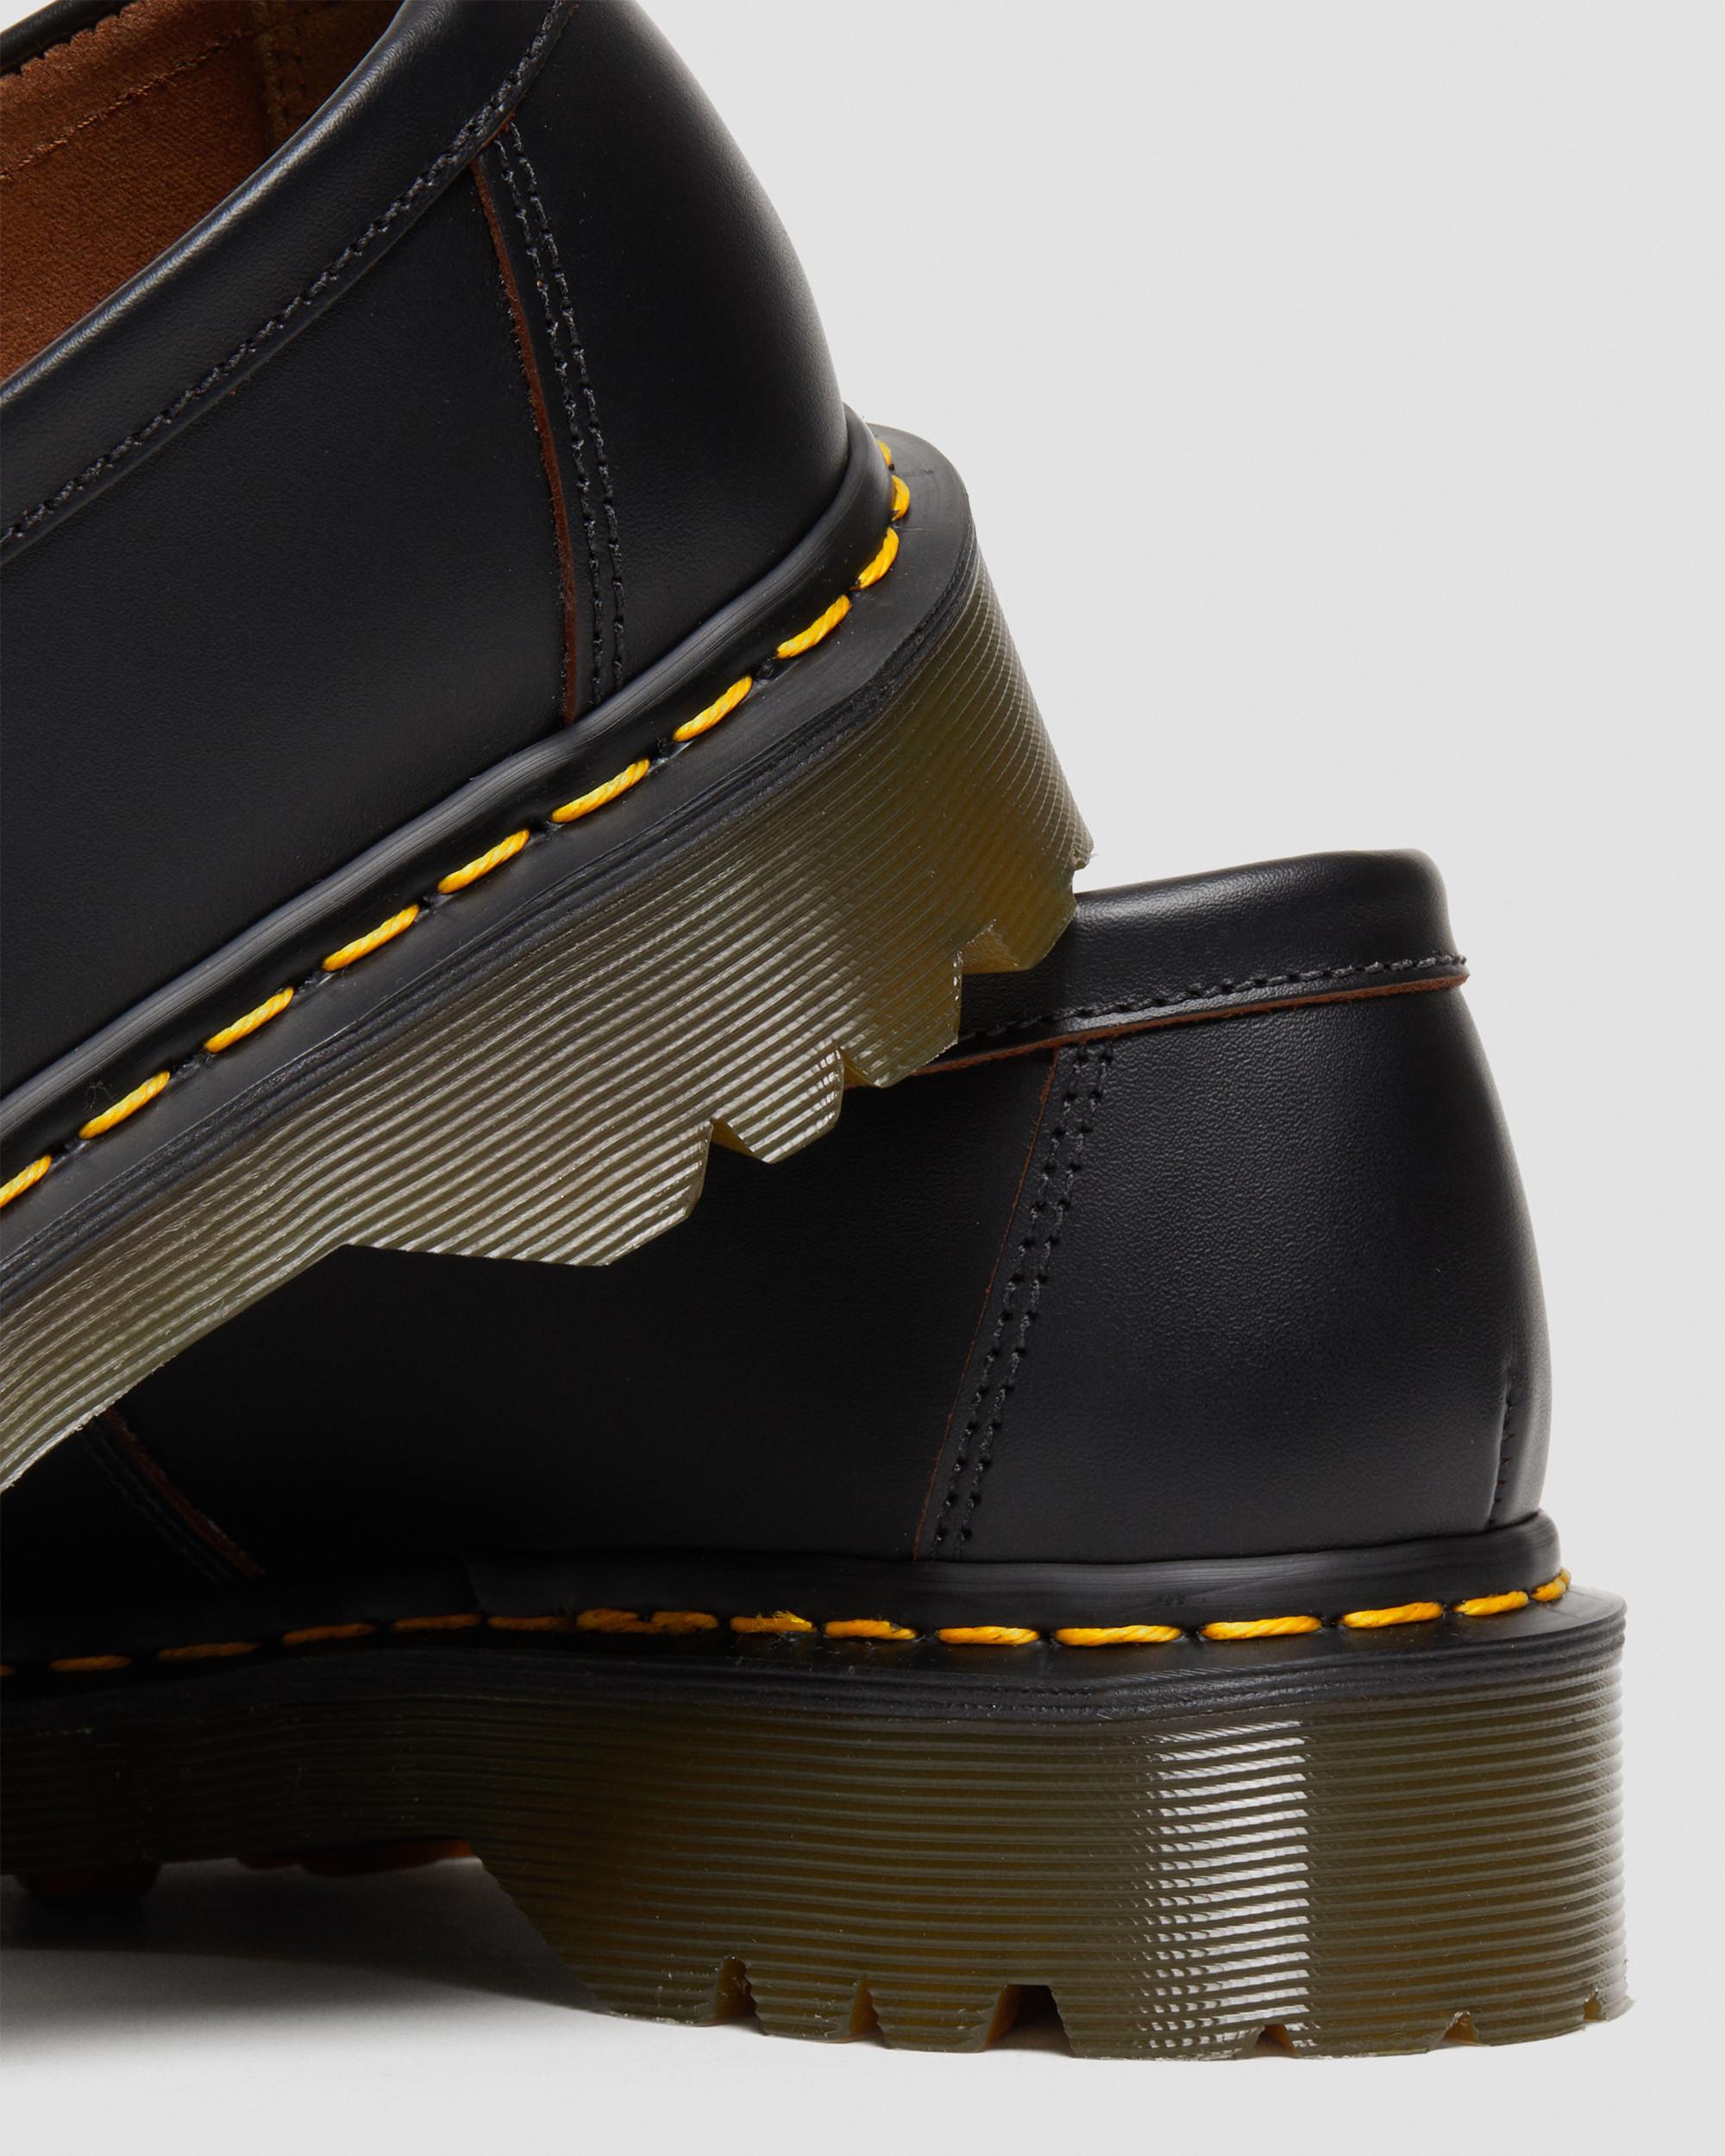 DR MARTENS Penton Smooth Leather Loafers